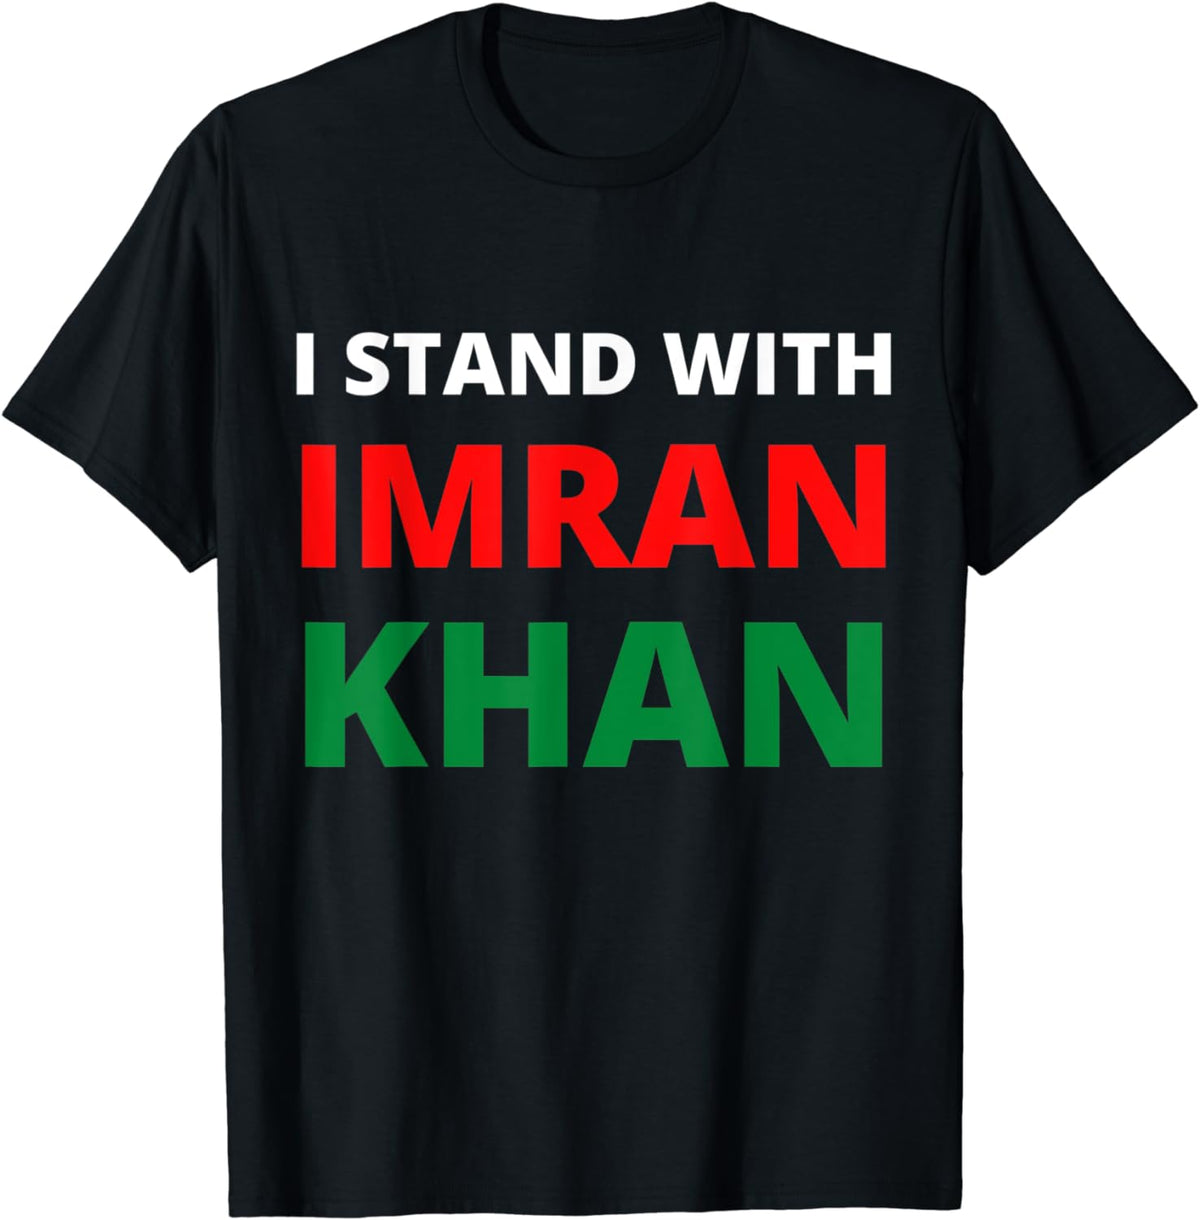 I stand with Imran khan - t shirt